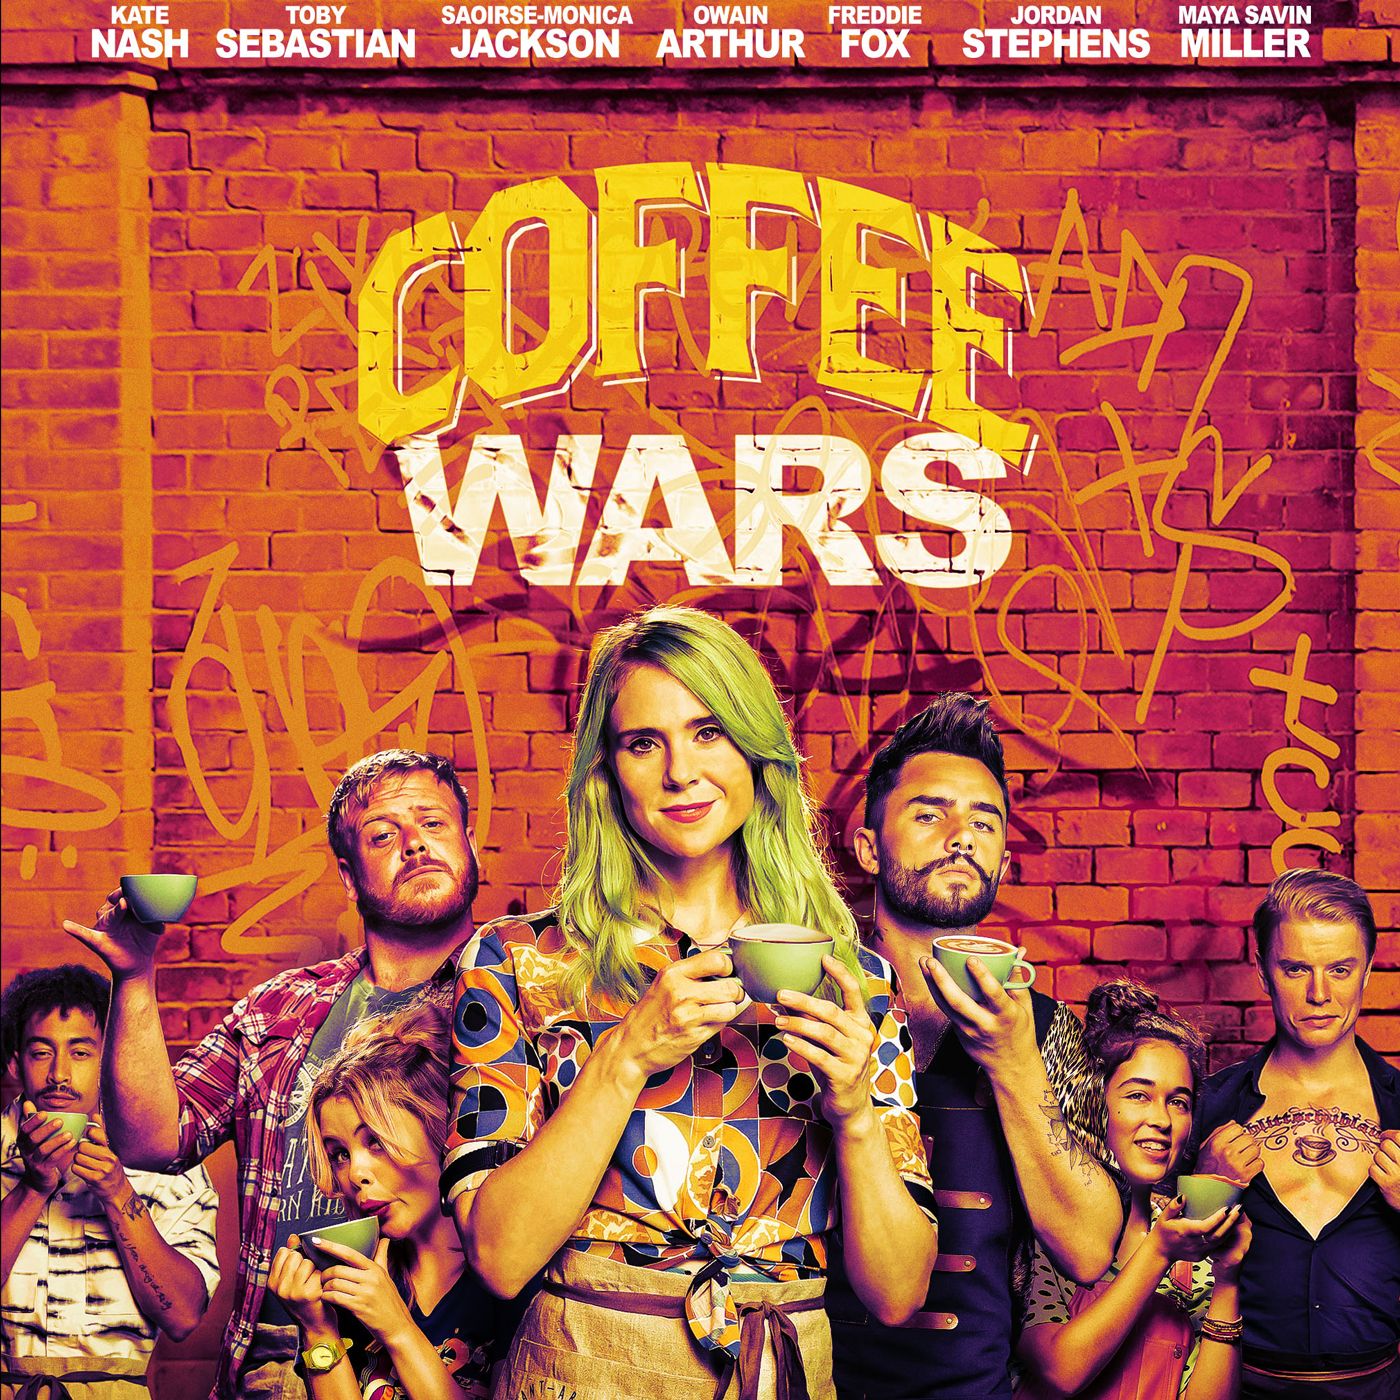 Special Report: Kate Nash & Toby Sebastian on Coffee Wars (2023)